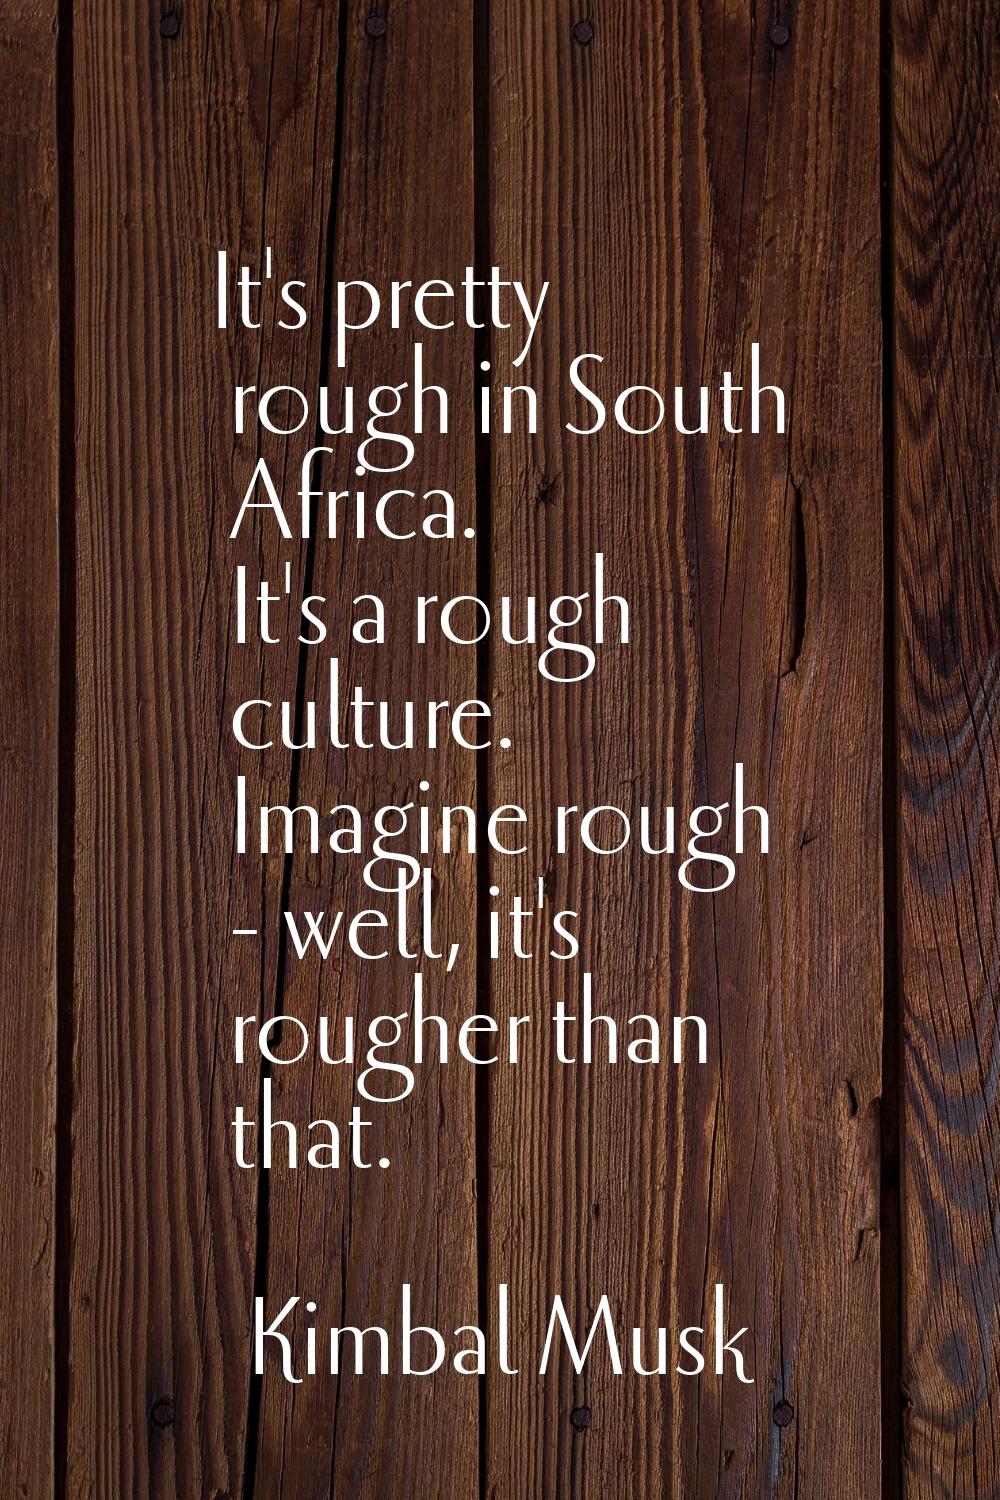 It's pretty rough in South Africa. It's a rough culture. Imagine rough - well, it's rougher than th